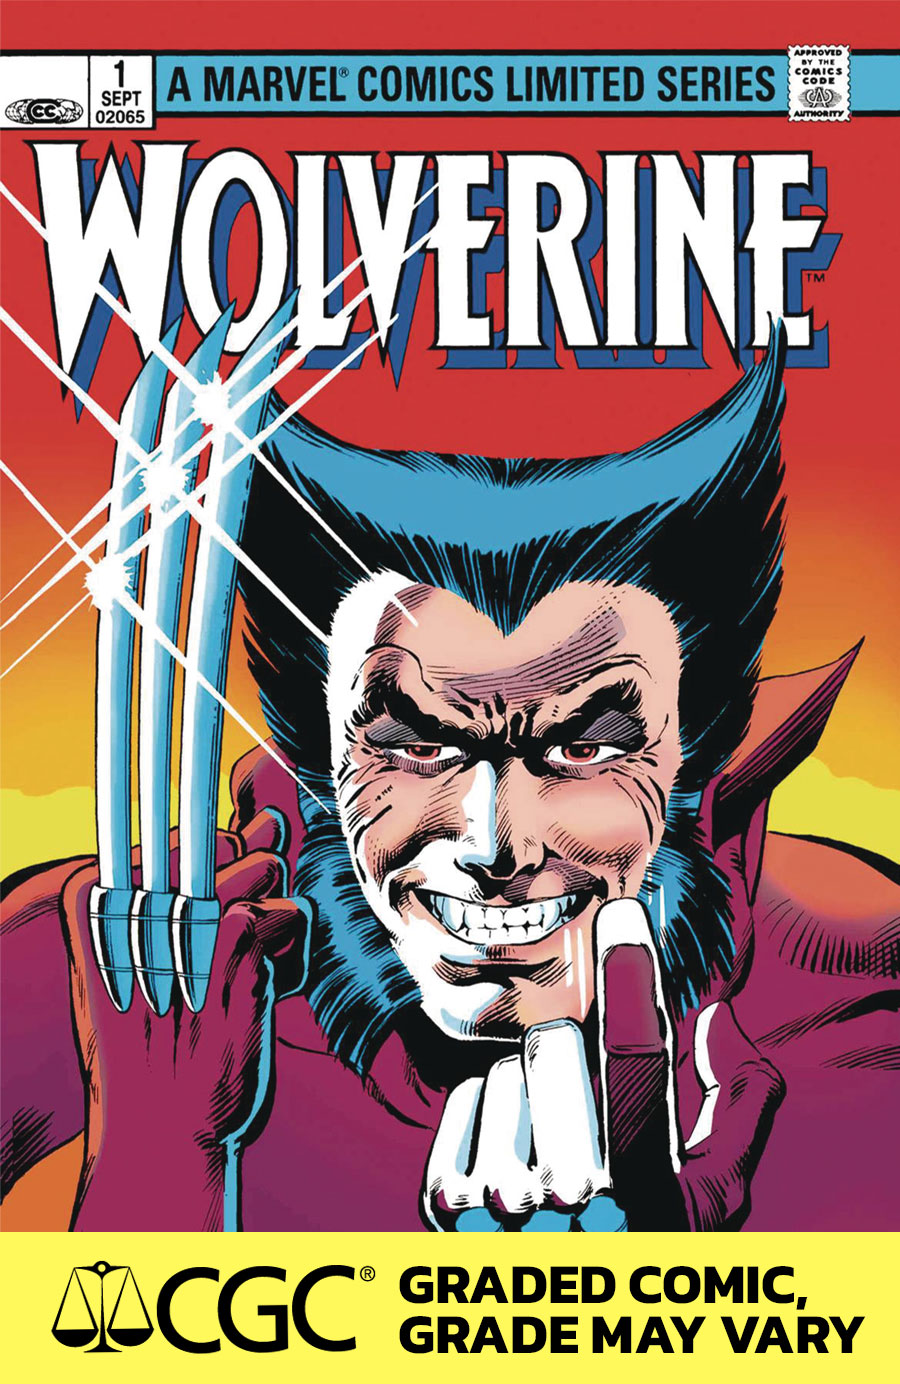 Wolverine By Claremont & Miller #1 Facsimile Edition Cover F DF Foil Variant Cover CGC Graded